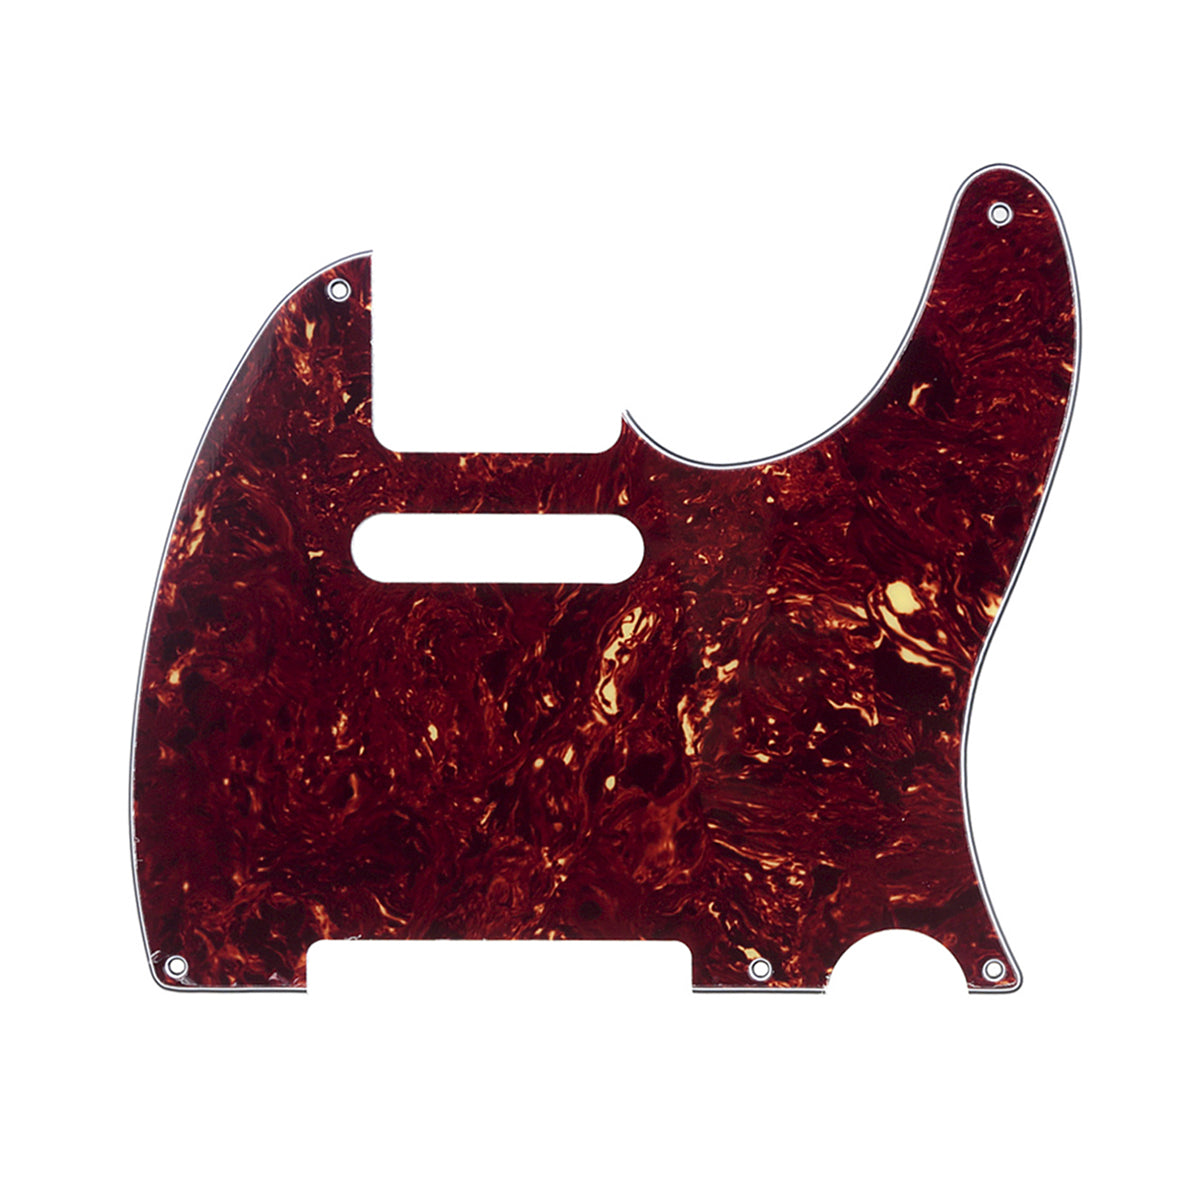 Musiclily 5 Hole Vintage Tele Pickguard for Fender American/Mexican Made Standard Telecaster Style Electric Guitar, 4Ply Vintage Tortoise